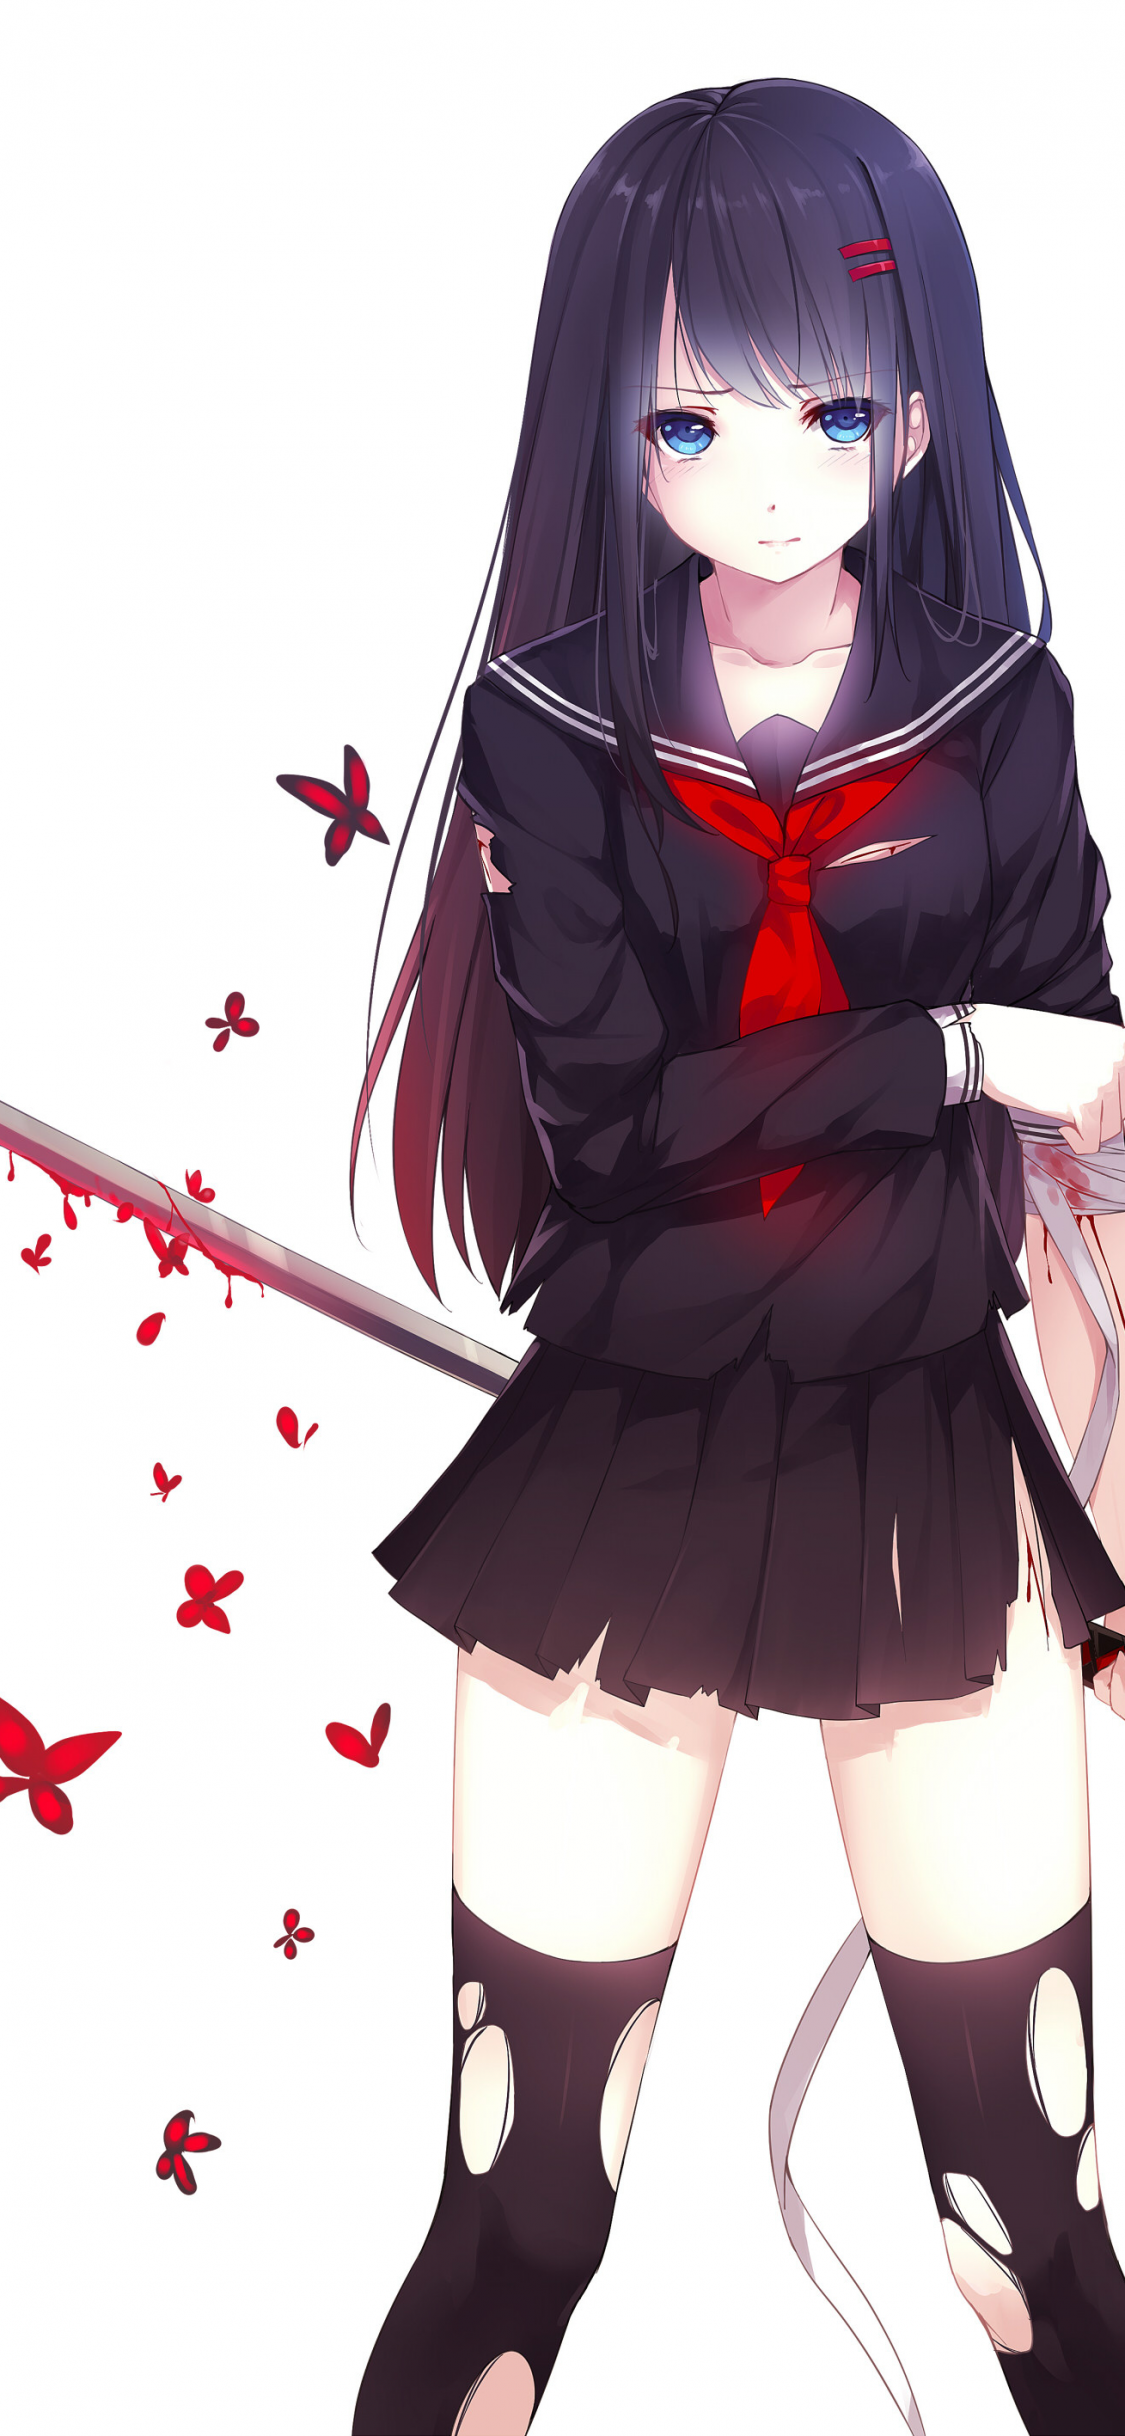 Download 1125x2436 Anime Girl, Katana, Fighter, School Uniform, Bandages Wallpaper for iPhone 11 Pro & X